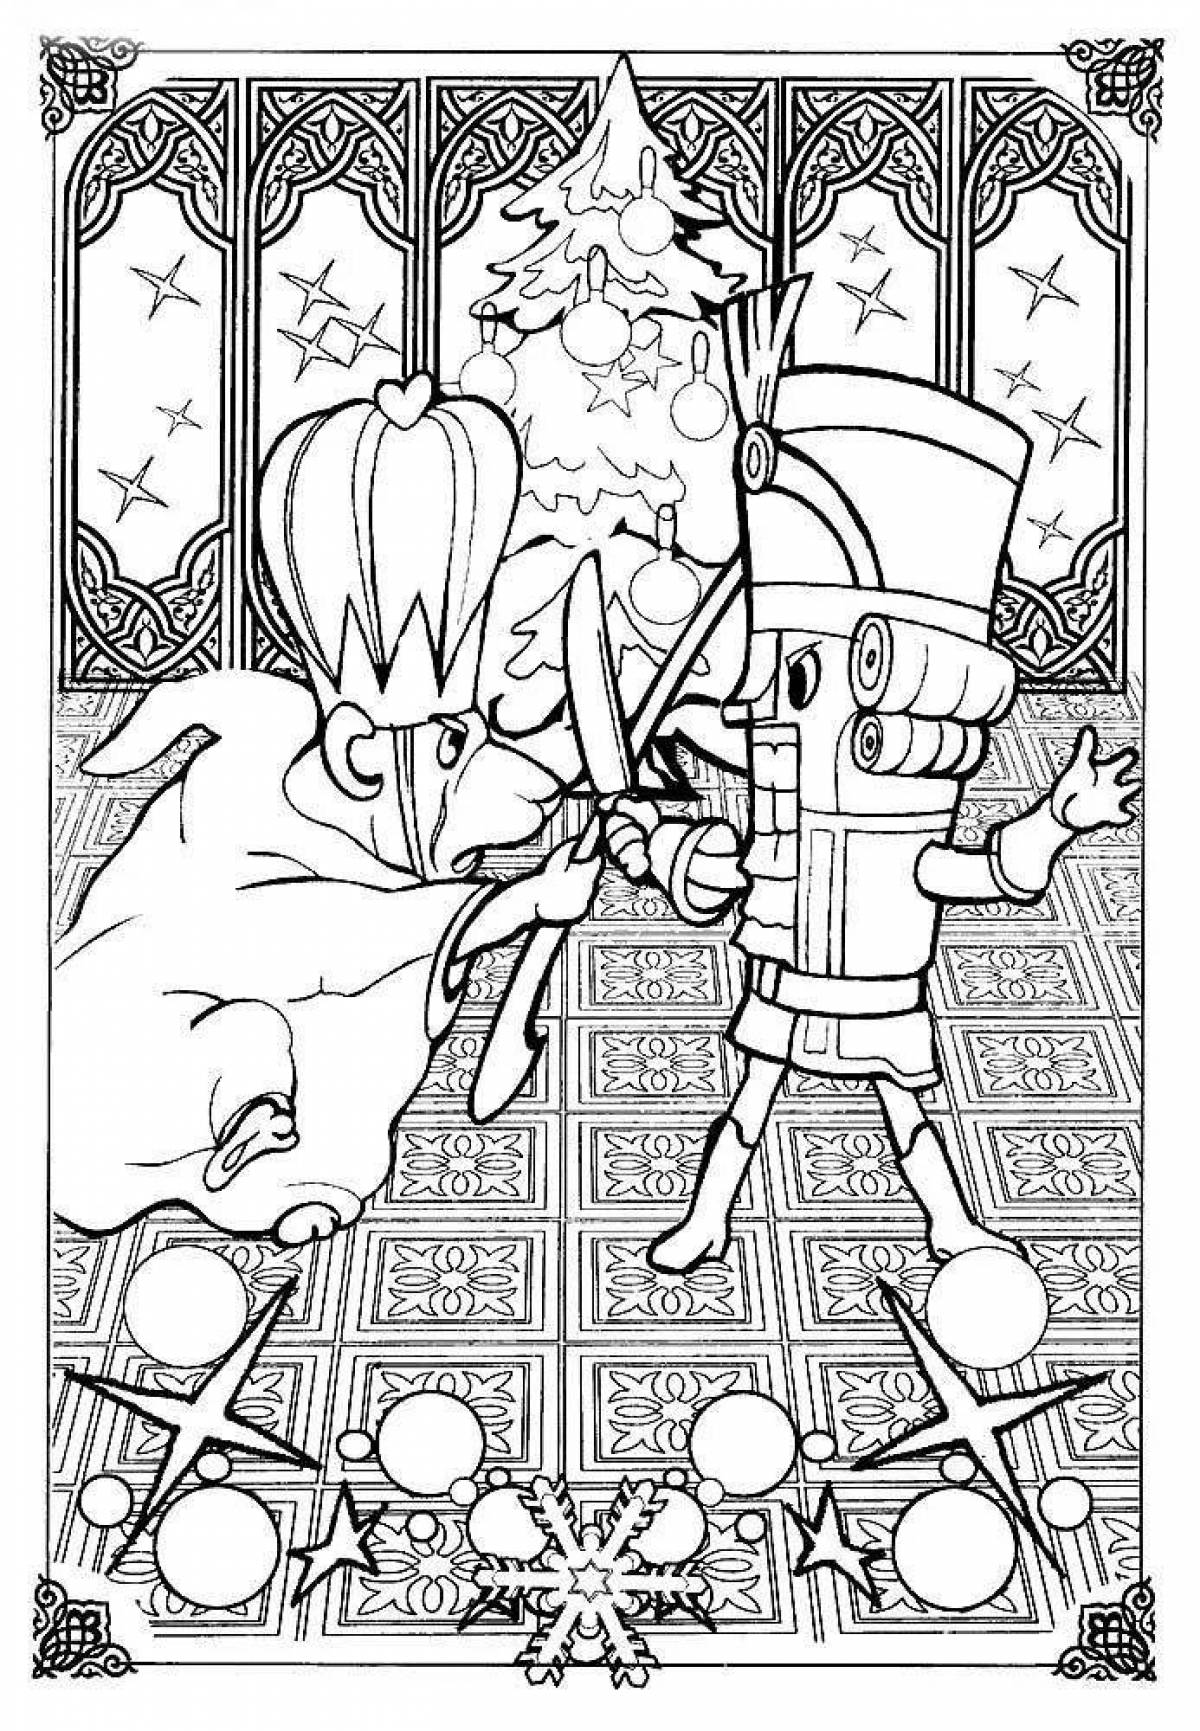 Elegant mouse king coloring page